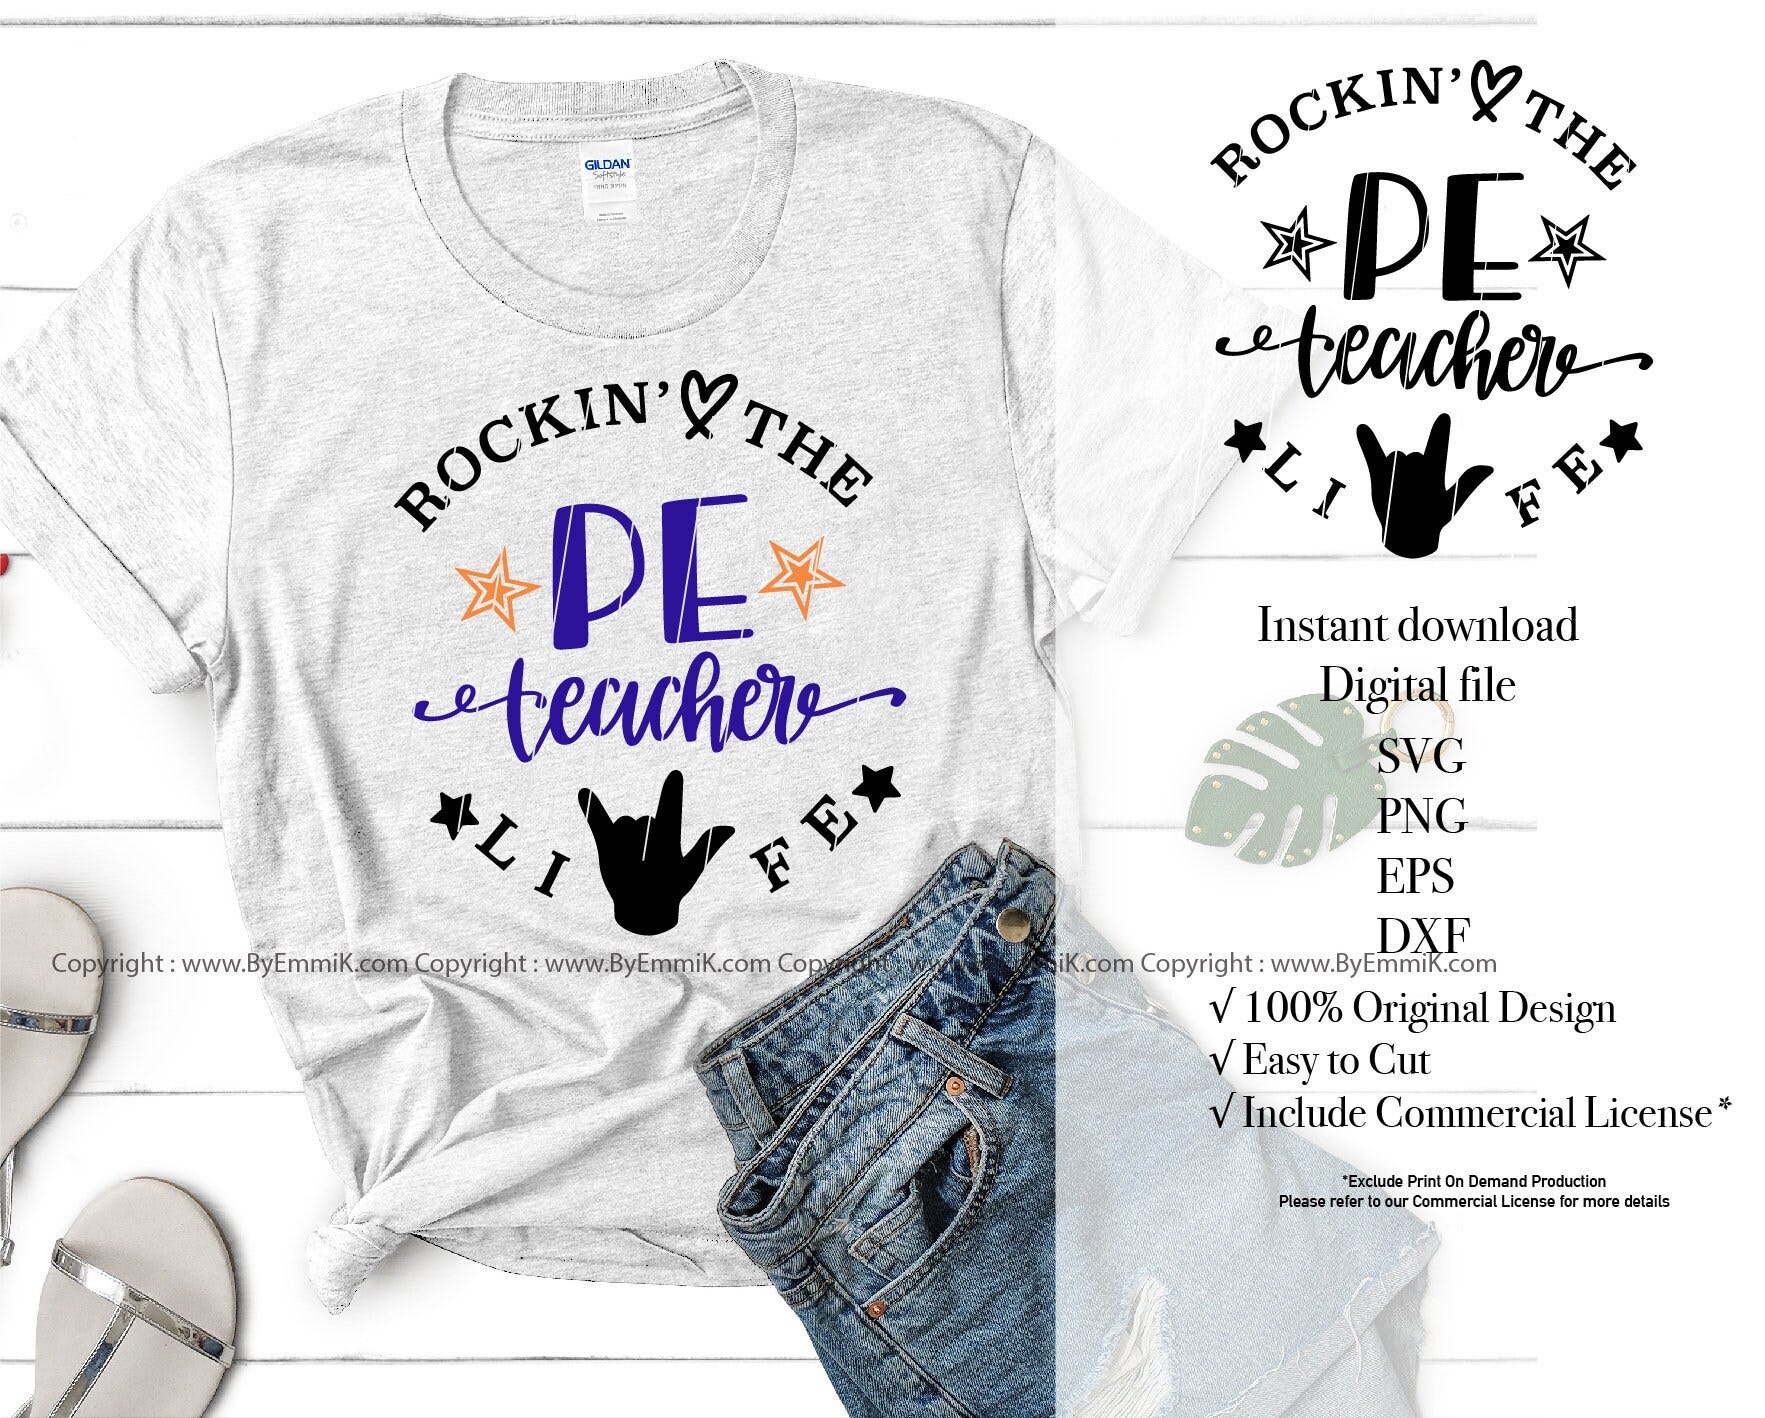 PE teacher svg, sports teacher svg, coach svg, instant download svg,eps,dxf,png, free commercial for t shirt, decal, stencil, vinyl iron on